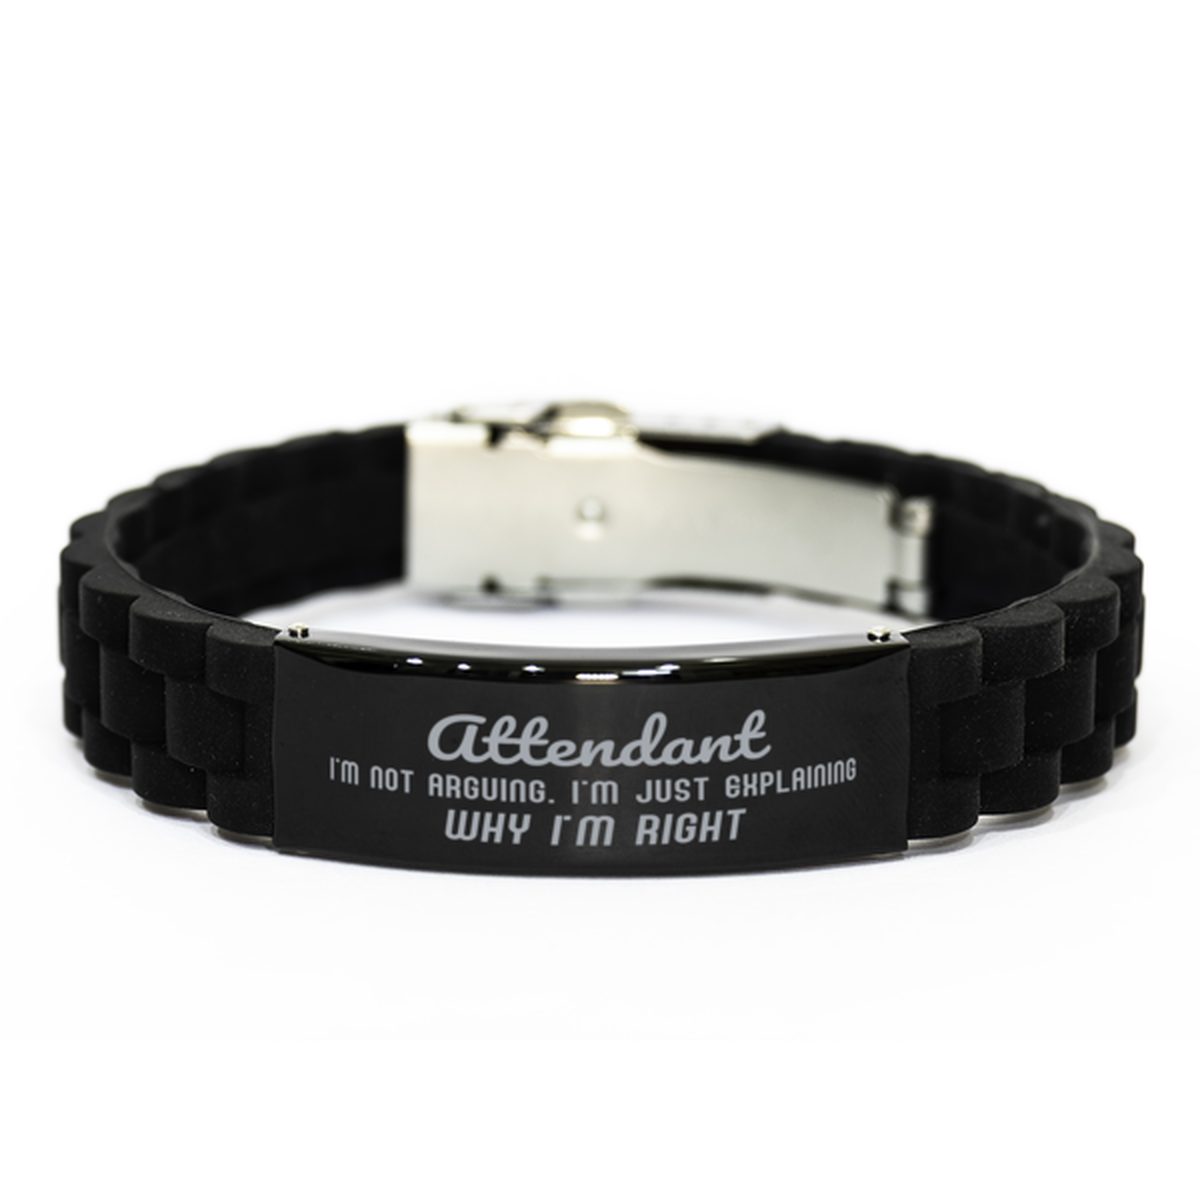 Attendant I'm not Arguing. I'm Just Explaining Why I'm RIGHT Black Glidelock Clasp Bracelet, Funny Saying Quote Attendant Gifts For Attendant Graduation Birthday Christmas Gifts for Men Women Coworker